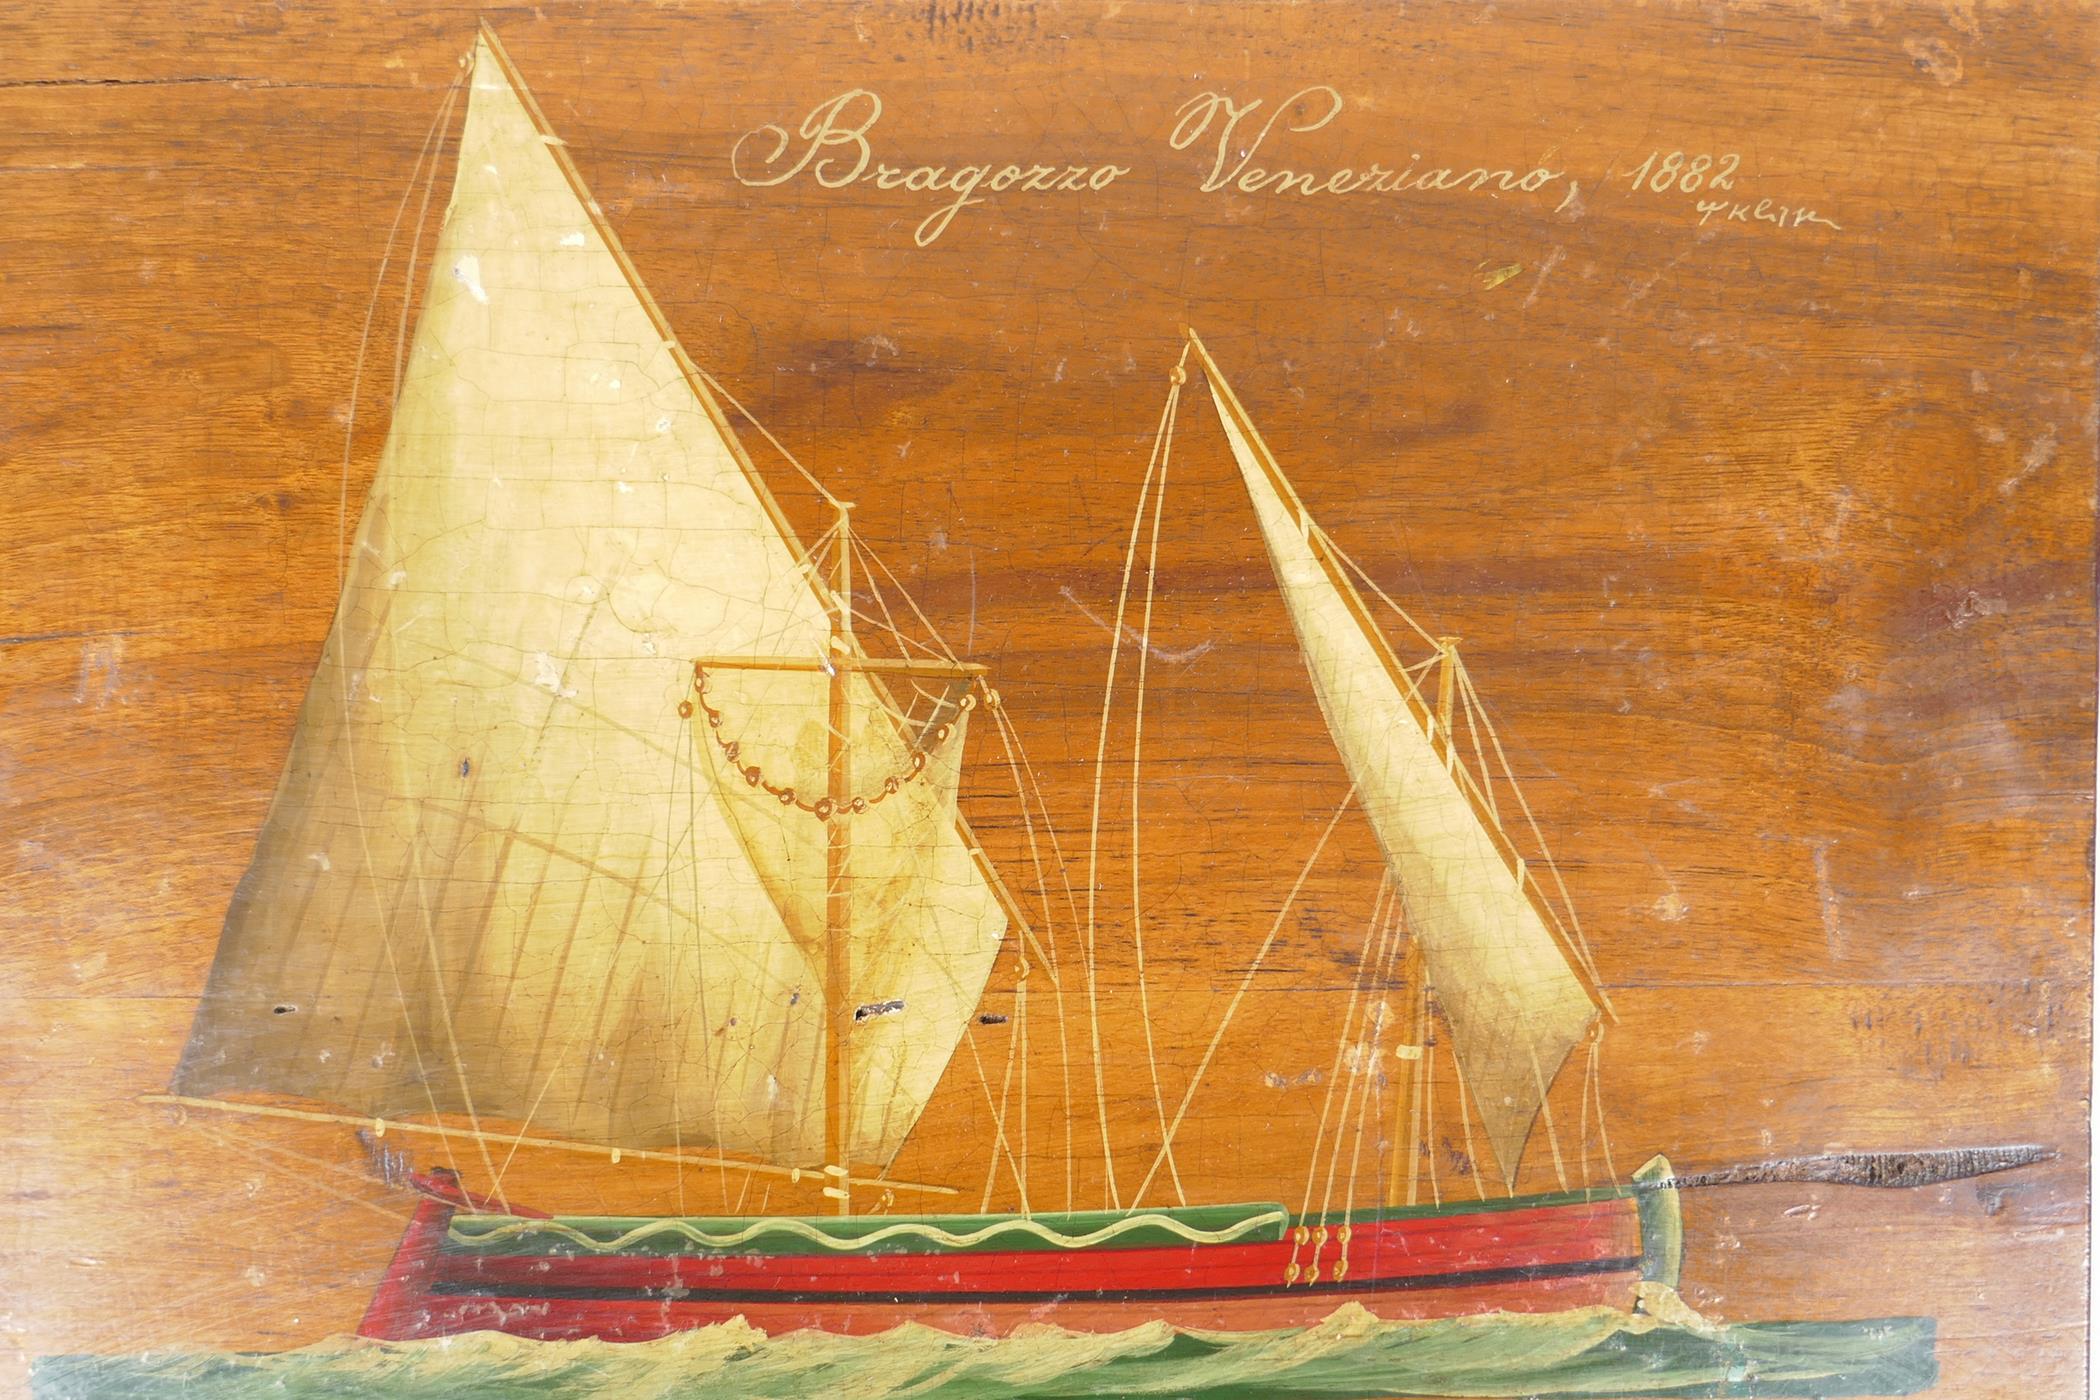 An adriatic sailing boat, 'Bragazzo Venezians, 1882' signed indistinctly, painted on a wood panel,